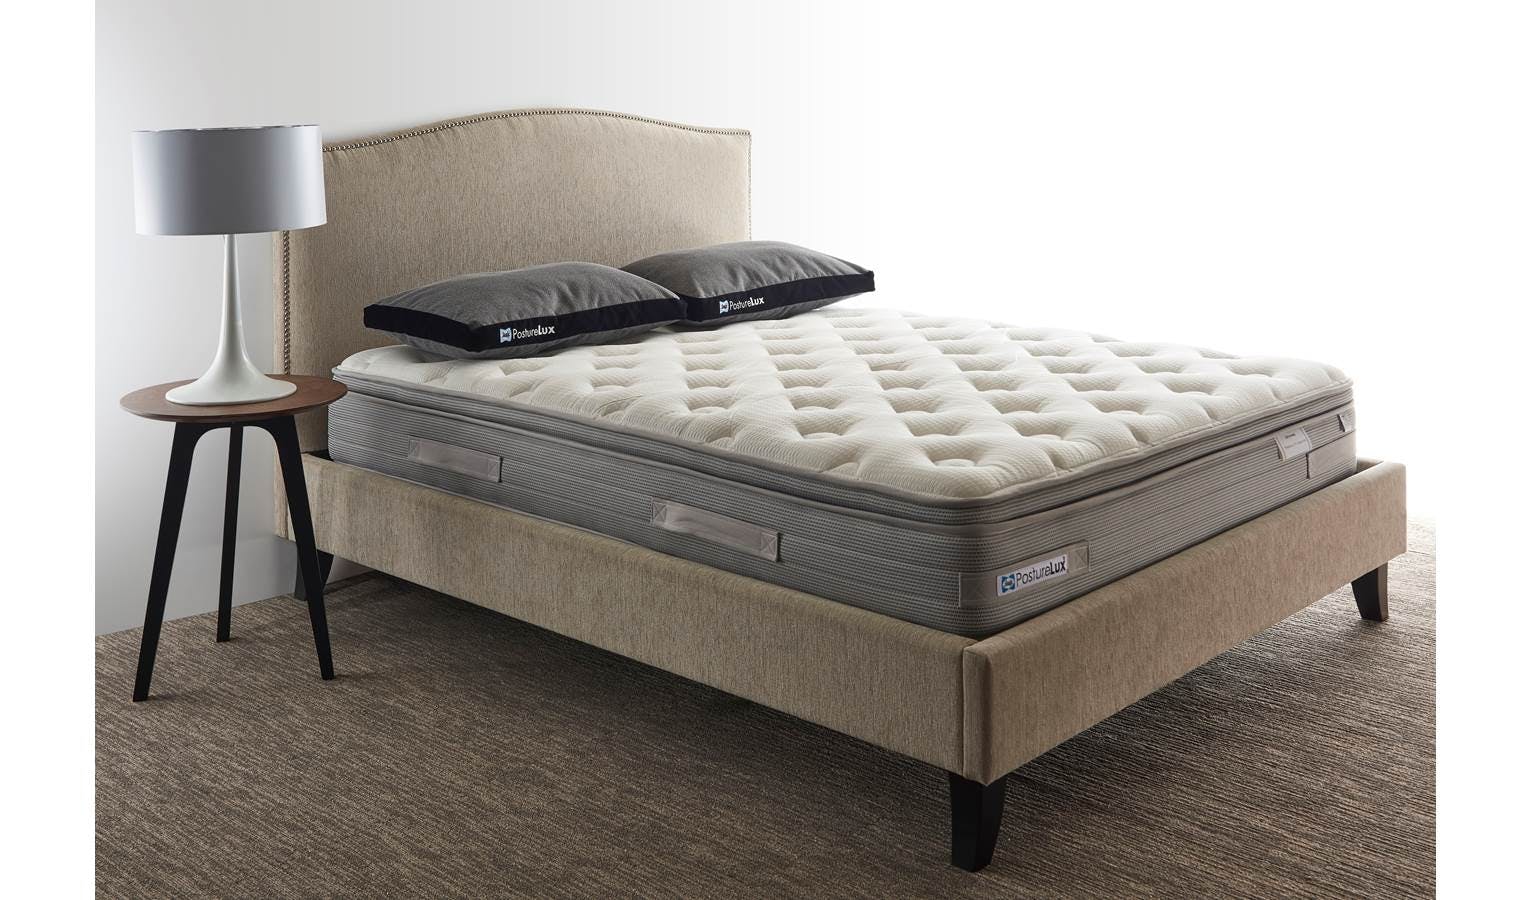 sealy response kenney firm queen mattress sears